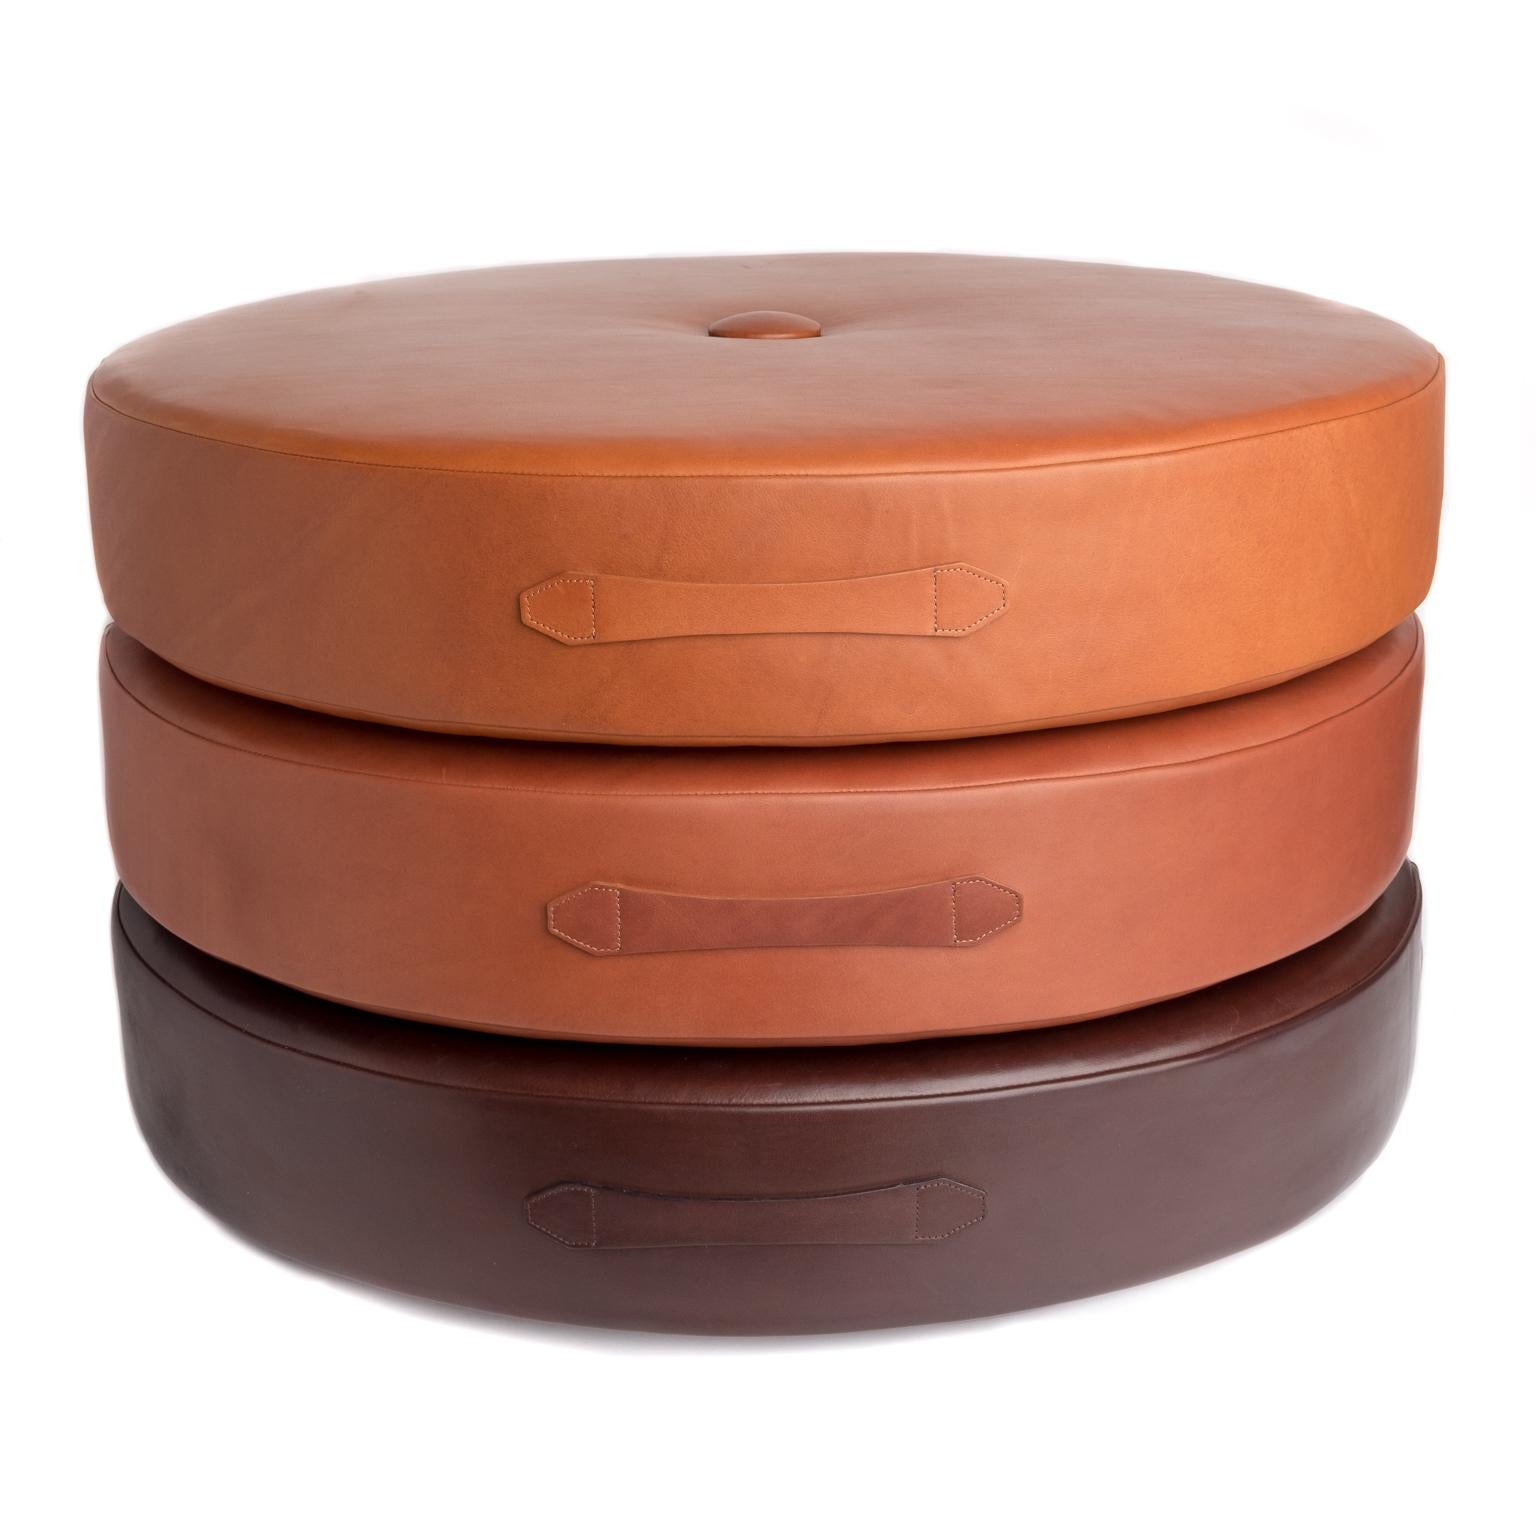 Designed to wake up your space with additional seating, accent decor and cozy chill zones, these low-profile circular leather floor cushions can be easily moved or stashed away. Also available as a set of three (separate listing). 

Construction: